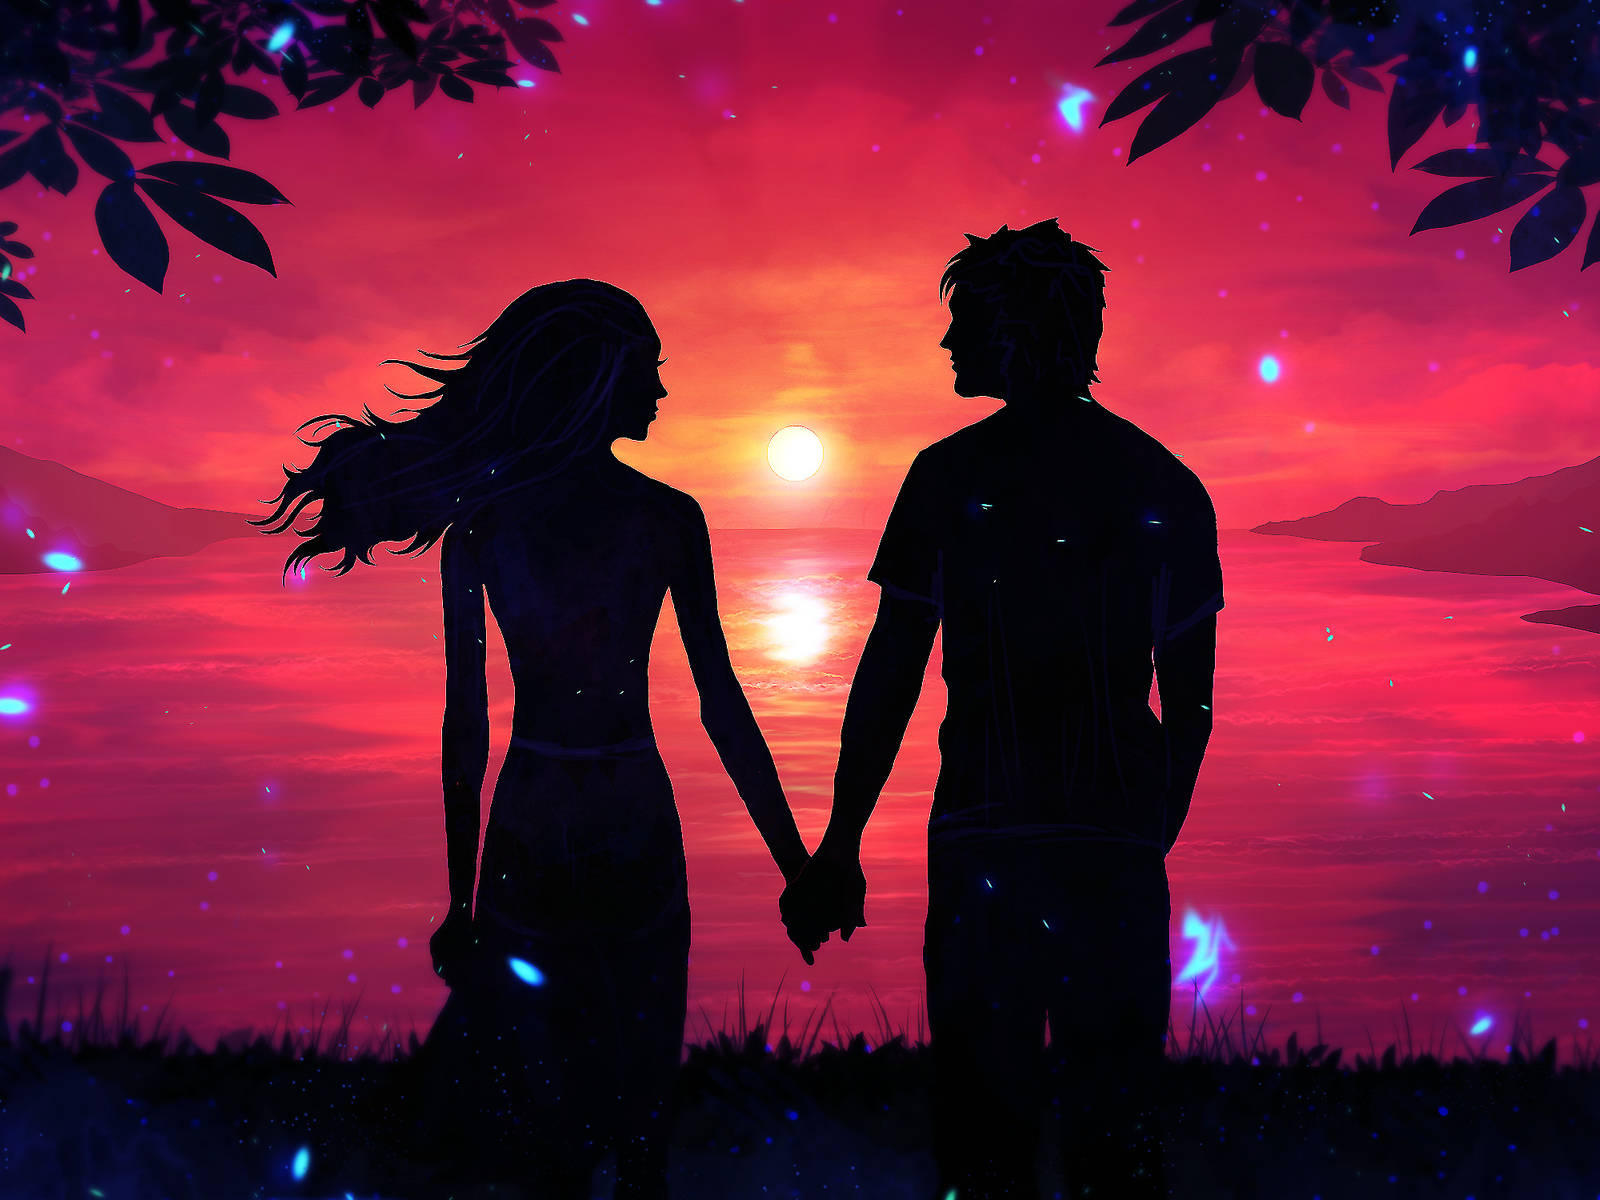 Holding Hands While Facing Sunset Silhouette Digital Art